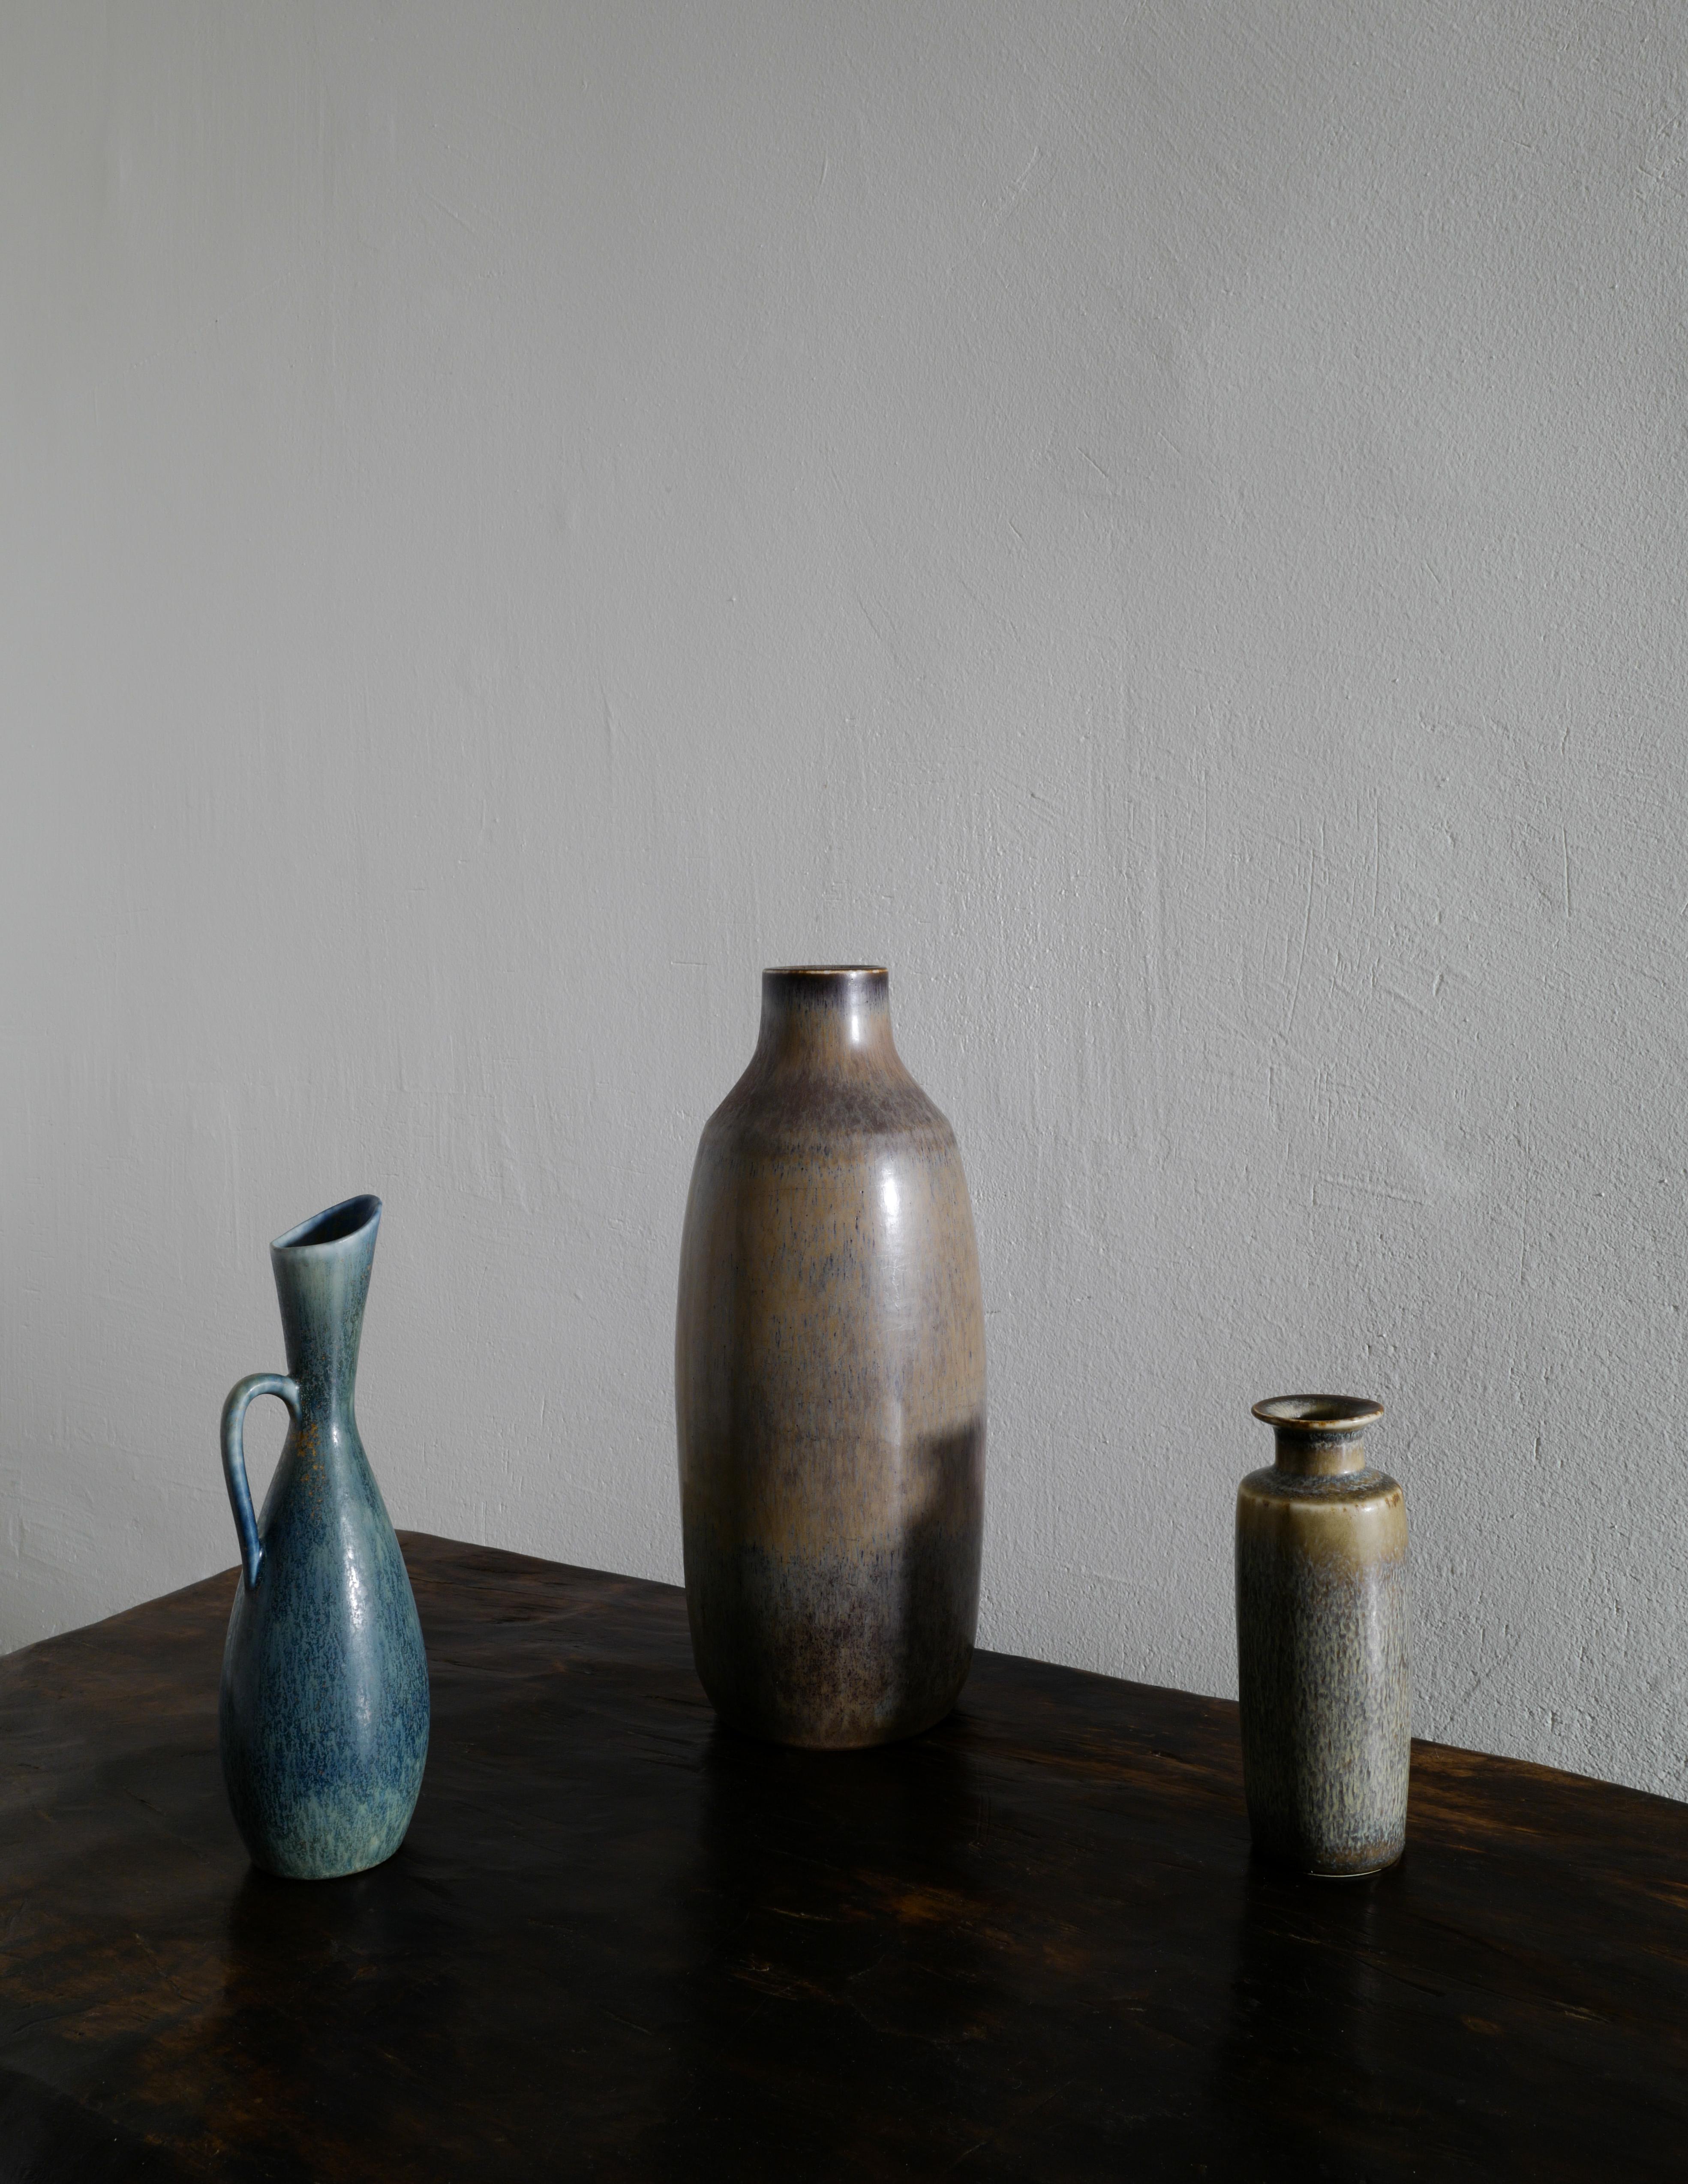 Great and rare trio of Carl Harry-Stålhane mid-century ceramics produced by Rörstrand Studio in Sweden during the 1950s. All three pieces are in great vintage condition and showing minimal signs from age and use.

Dimensions: 
Large one: height: